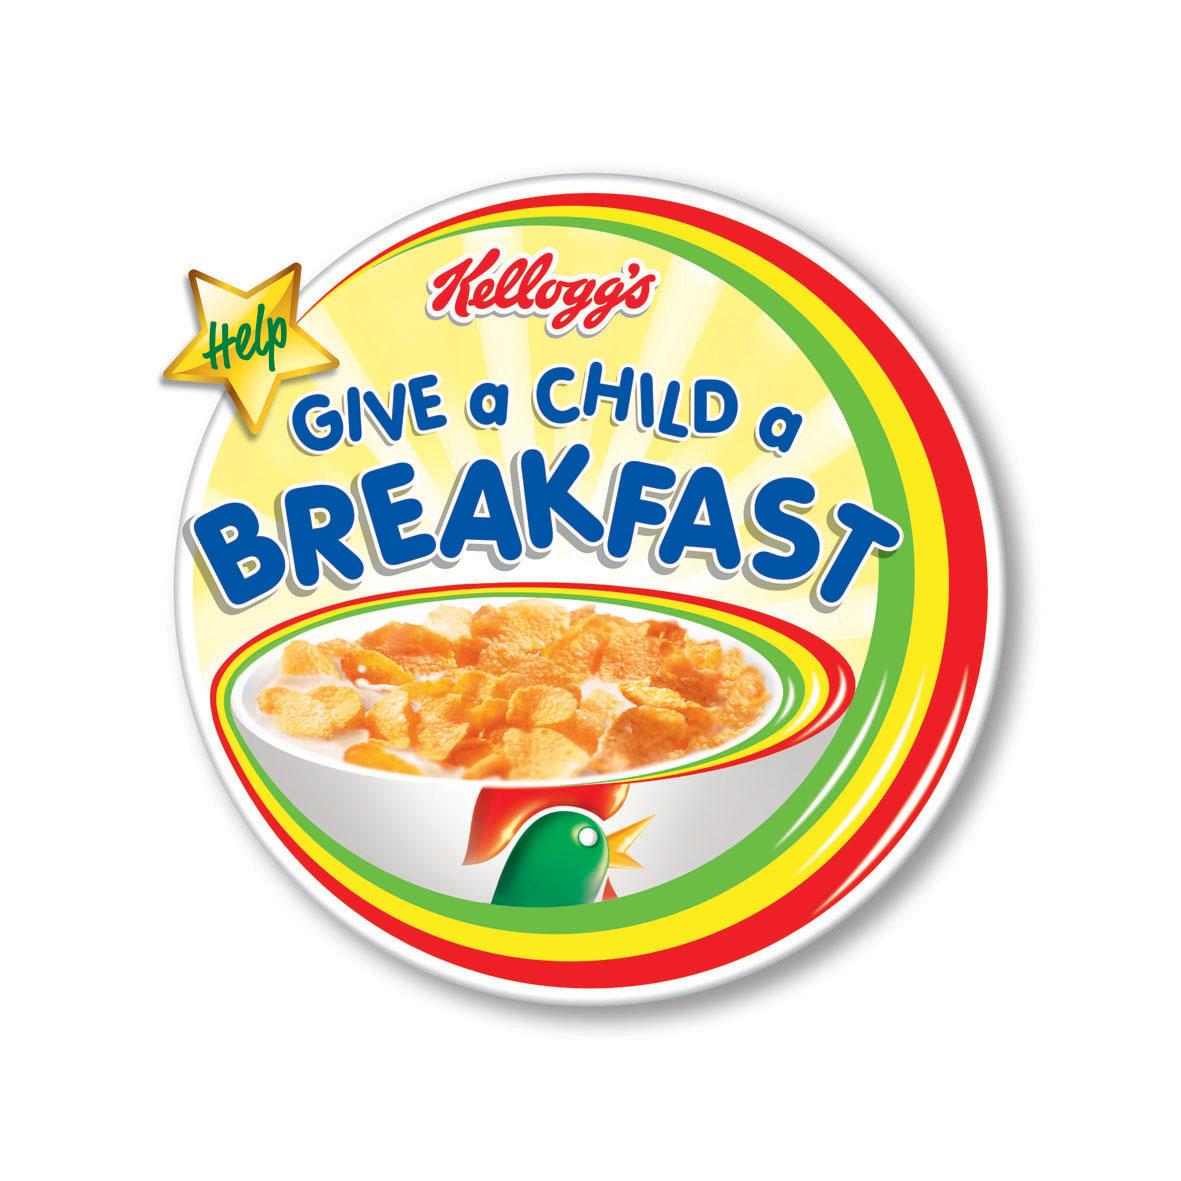 Give a child a breakfast and win a years supply of breakfast